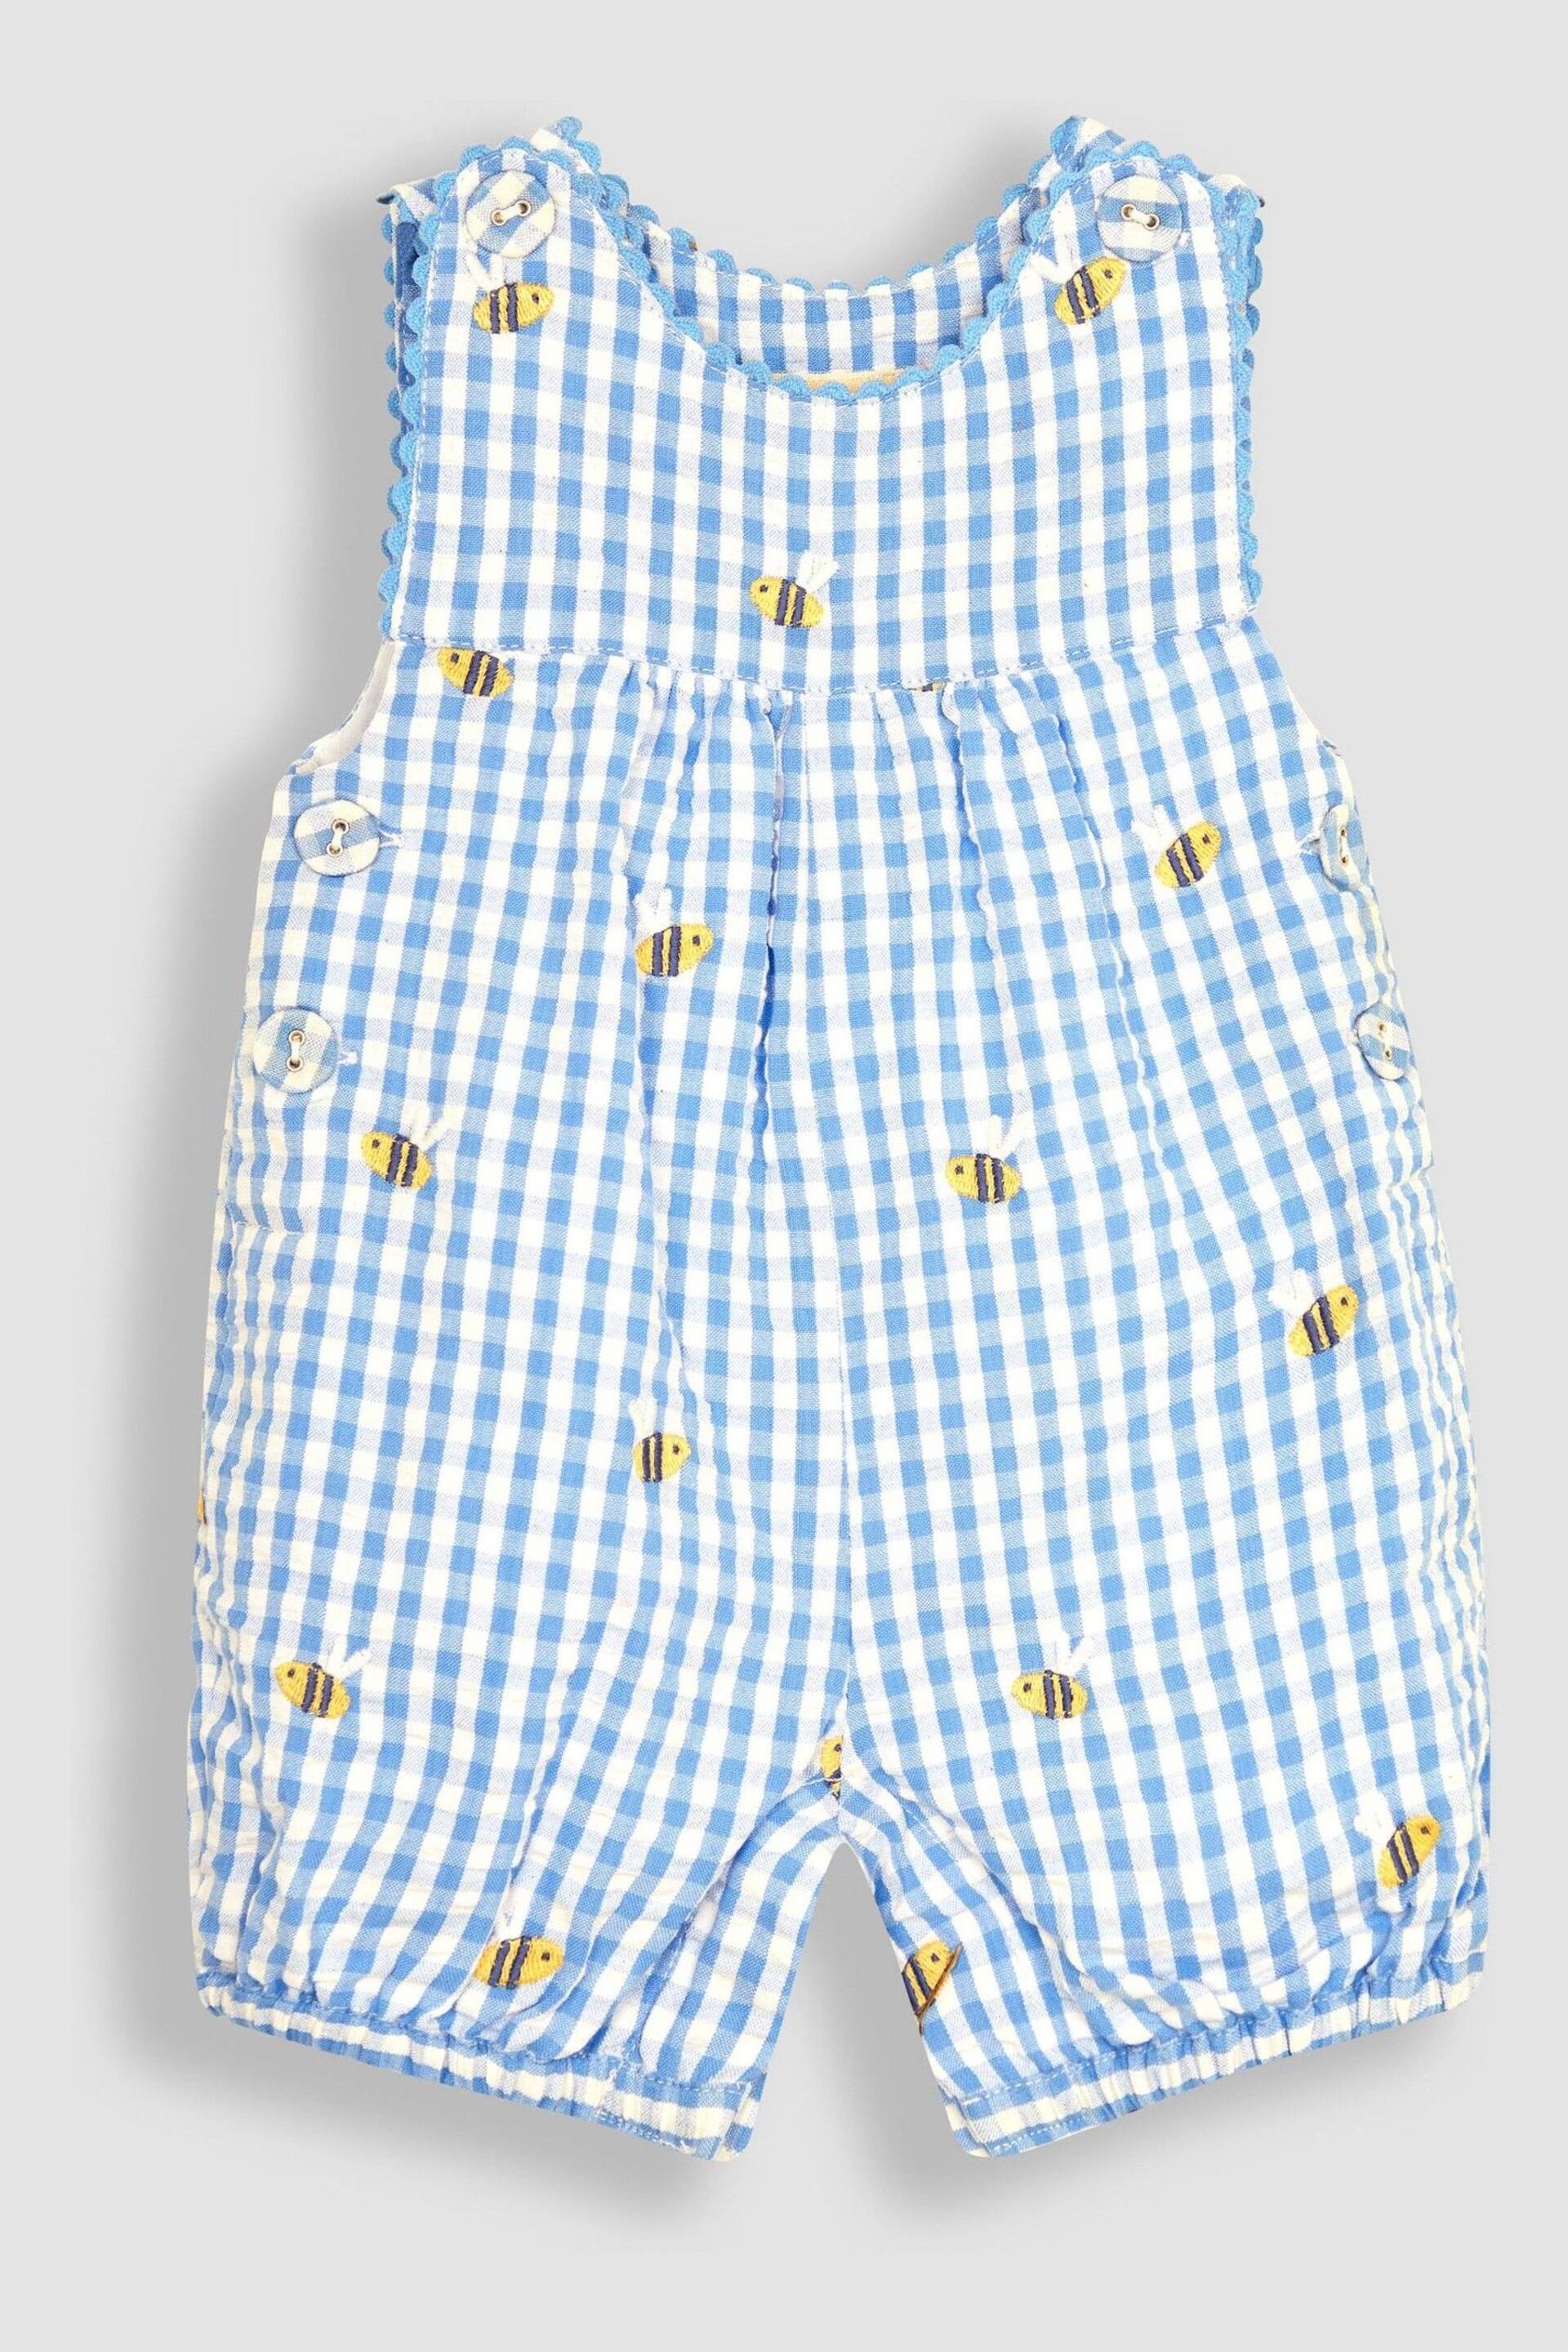 JoJo Maman Bébé Blue Bee Embroidered Gingham Dungarees - Image 1 of 3